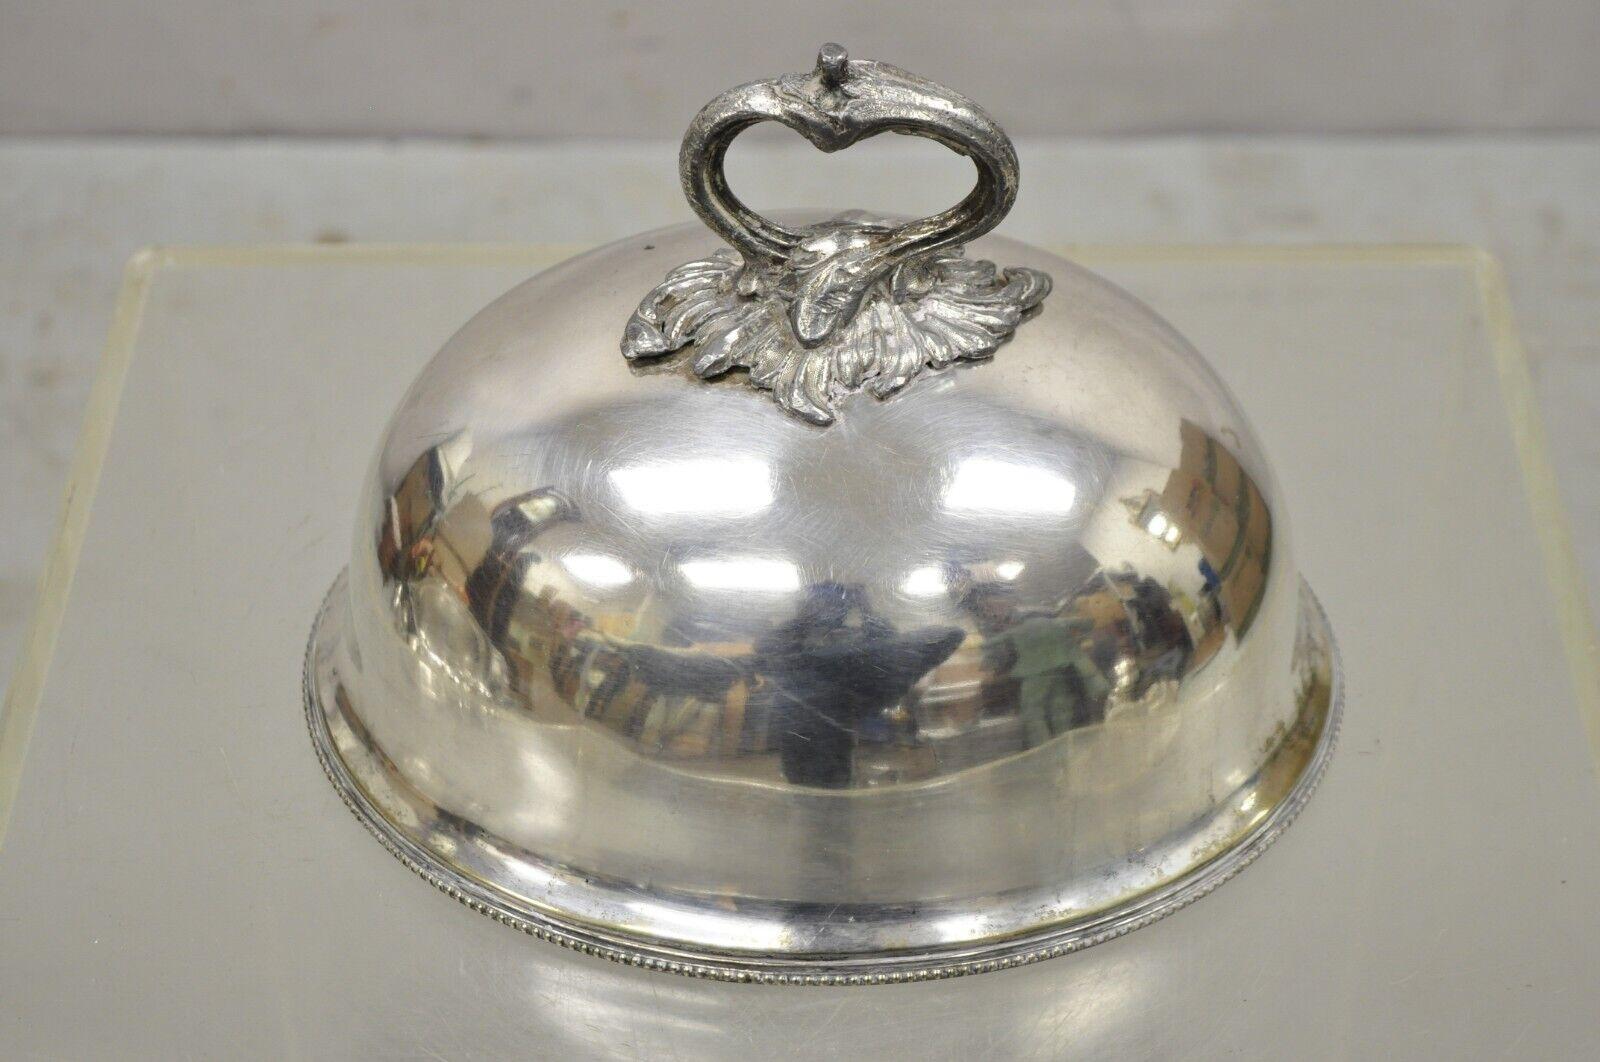 Antique English William Hutton Sons silver plated meat dish serving dome lid. Item features an ornate branch handle, oval dome shape, original stamp, very nice antique item, great style and form. circa early 1900s. Measurements: 7.5